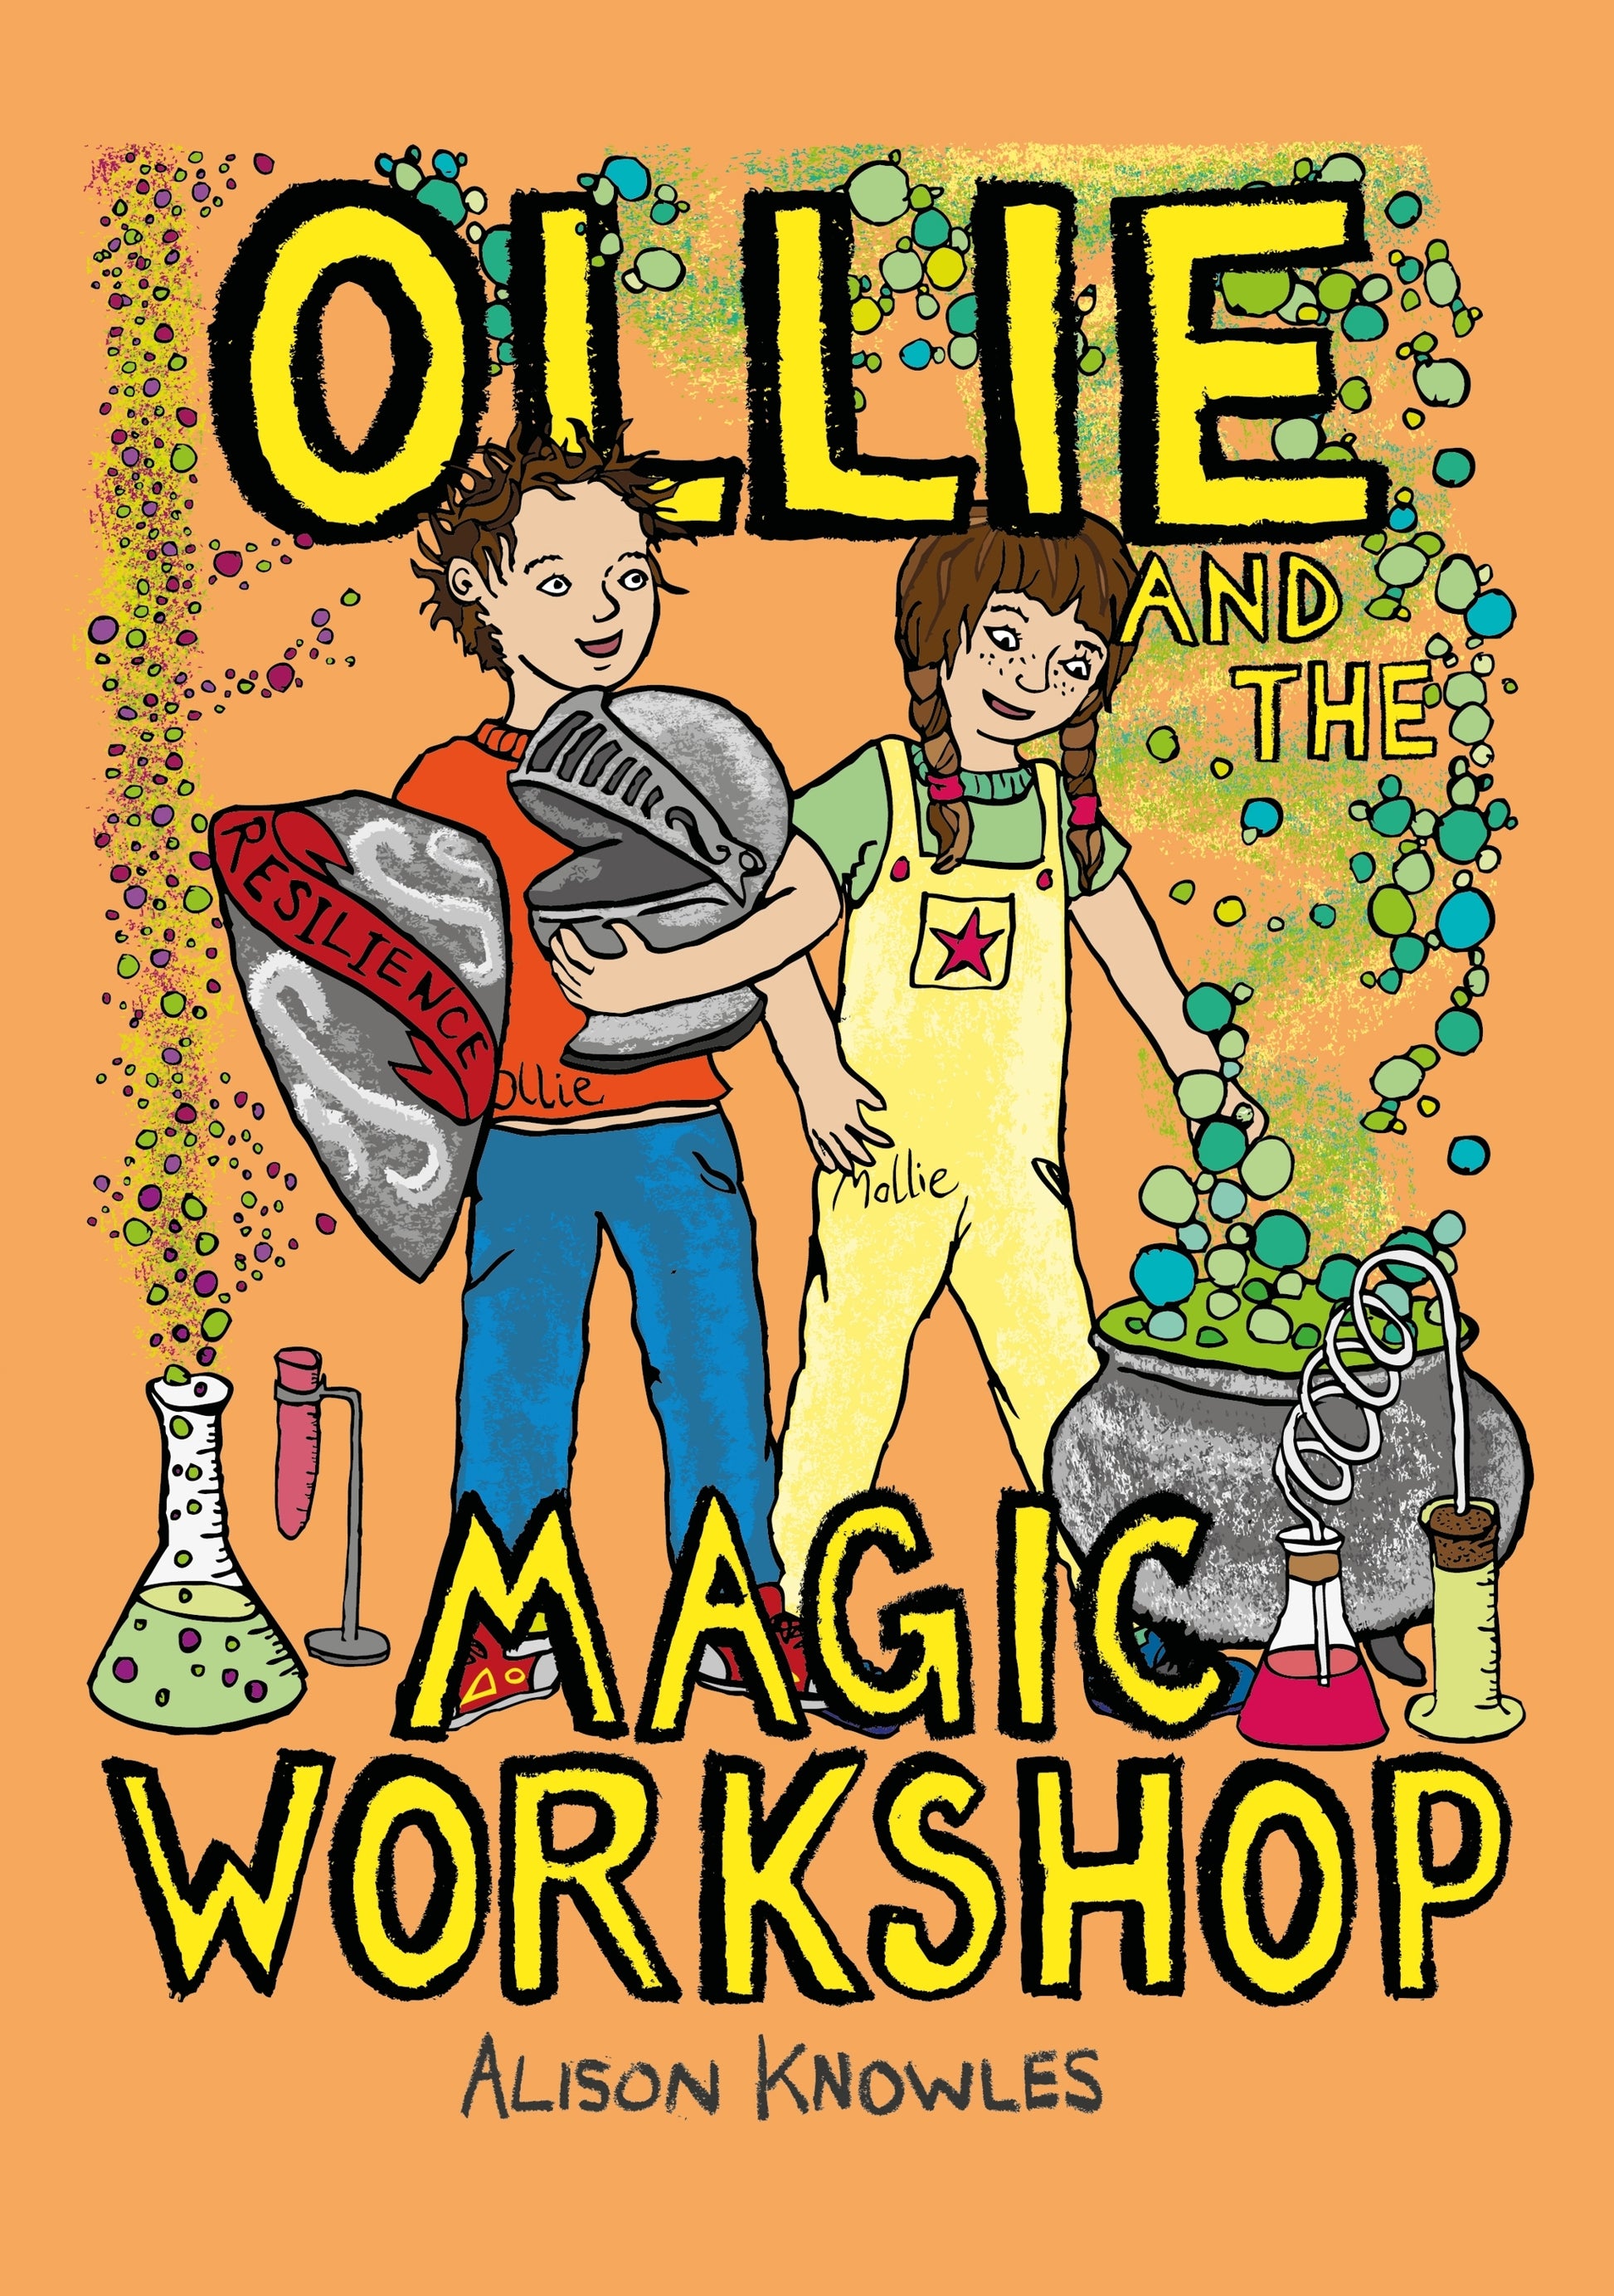 Ollie and the Magic Workshop by Alison Knowles, Sophie Wiltshire